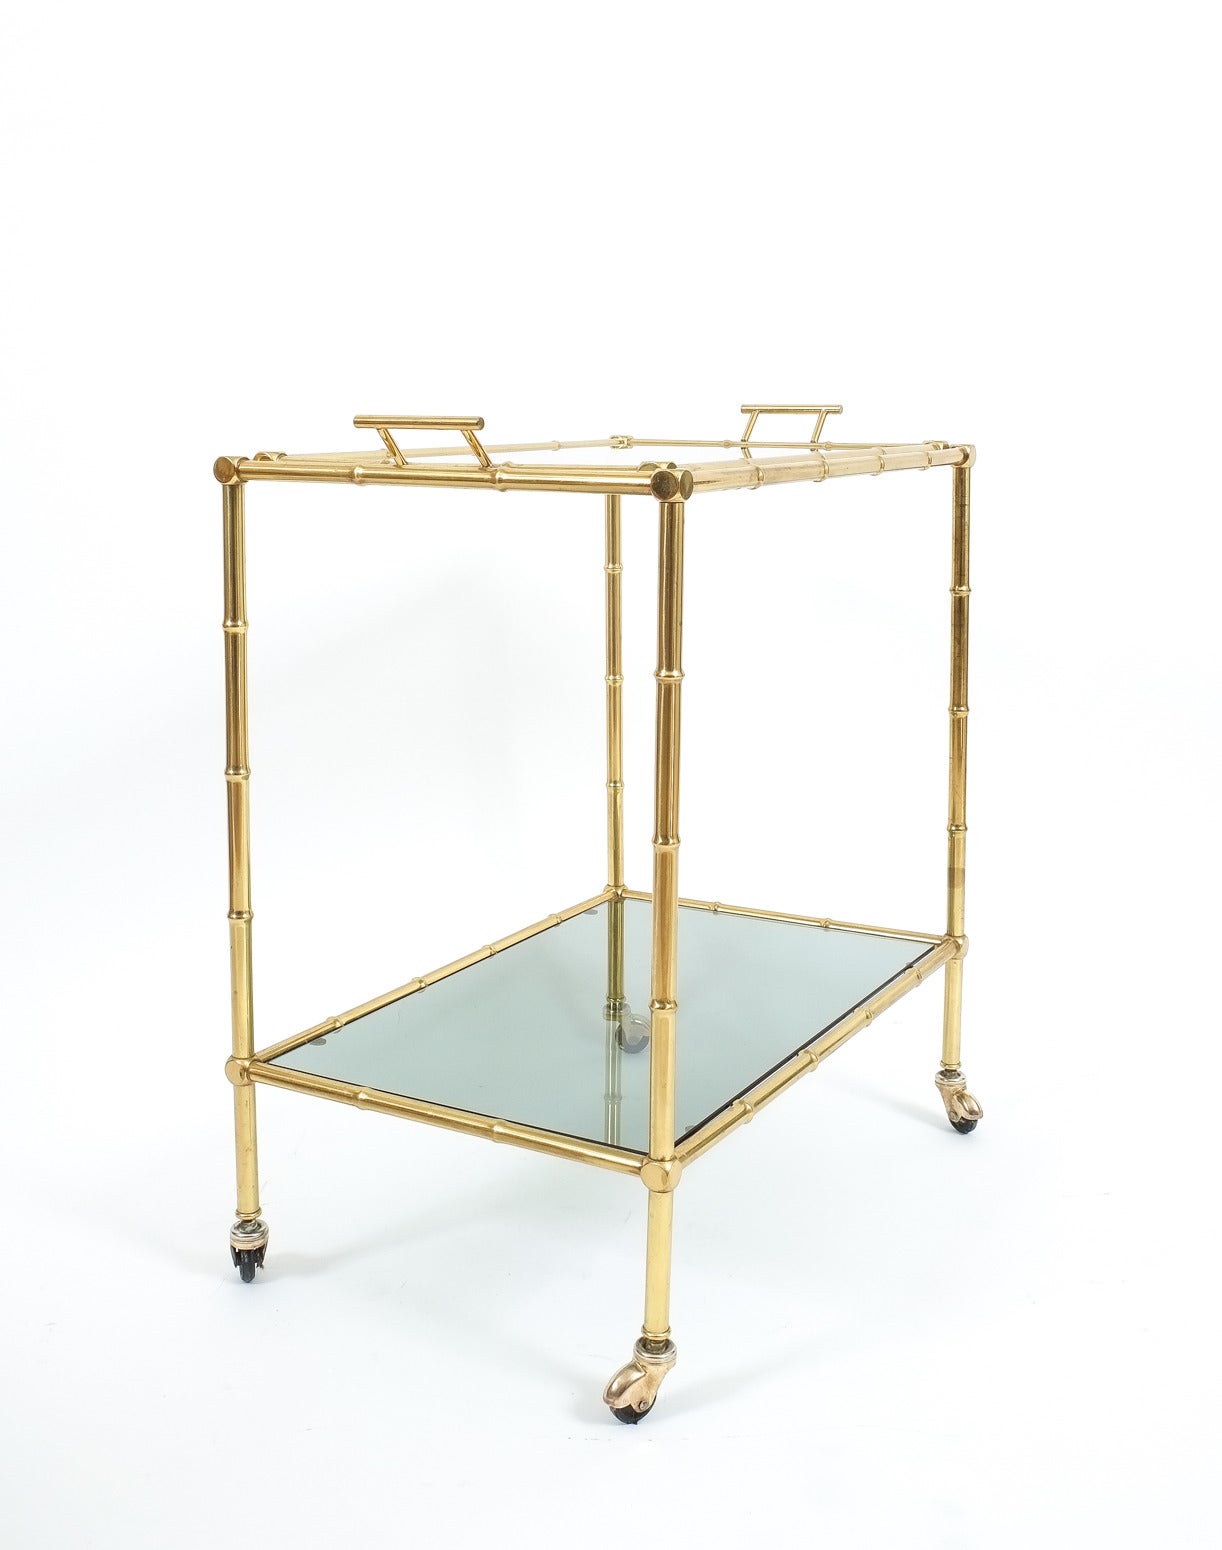 Elegant mid-century liquor or bar cart from France in the tradition of maison Bagues with a removable glass tray and abstracted faux bamboo brass hardware. it's in very good condition.